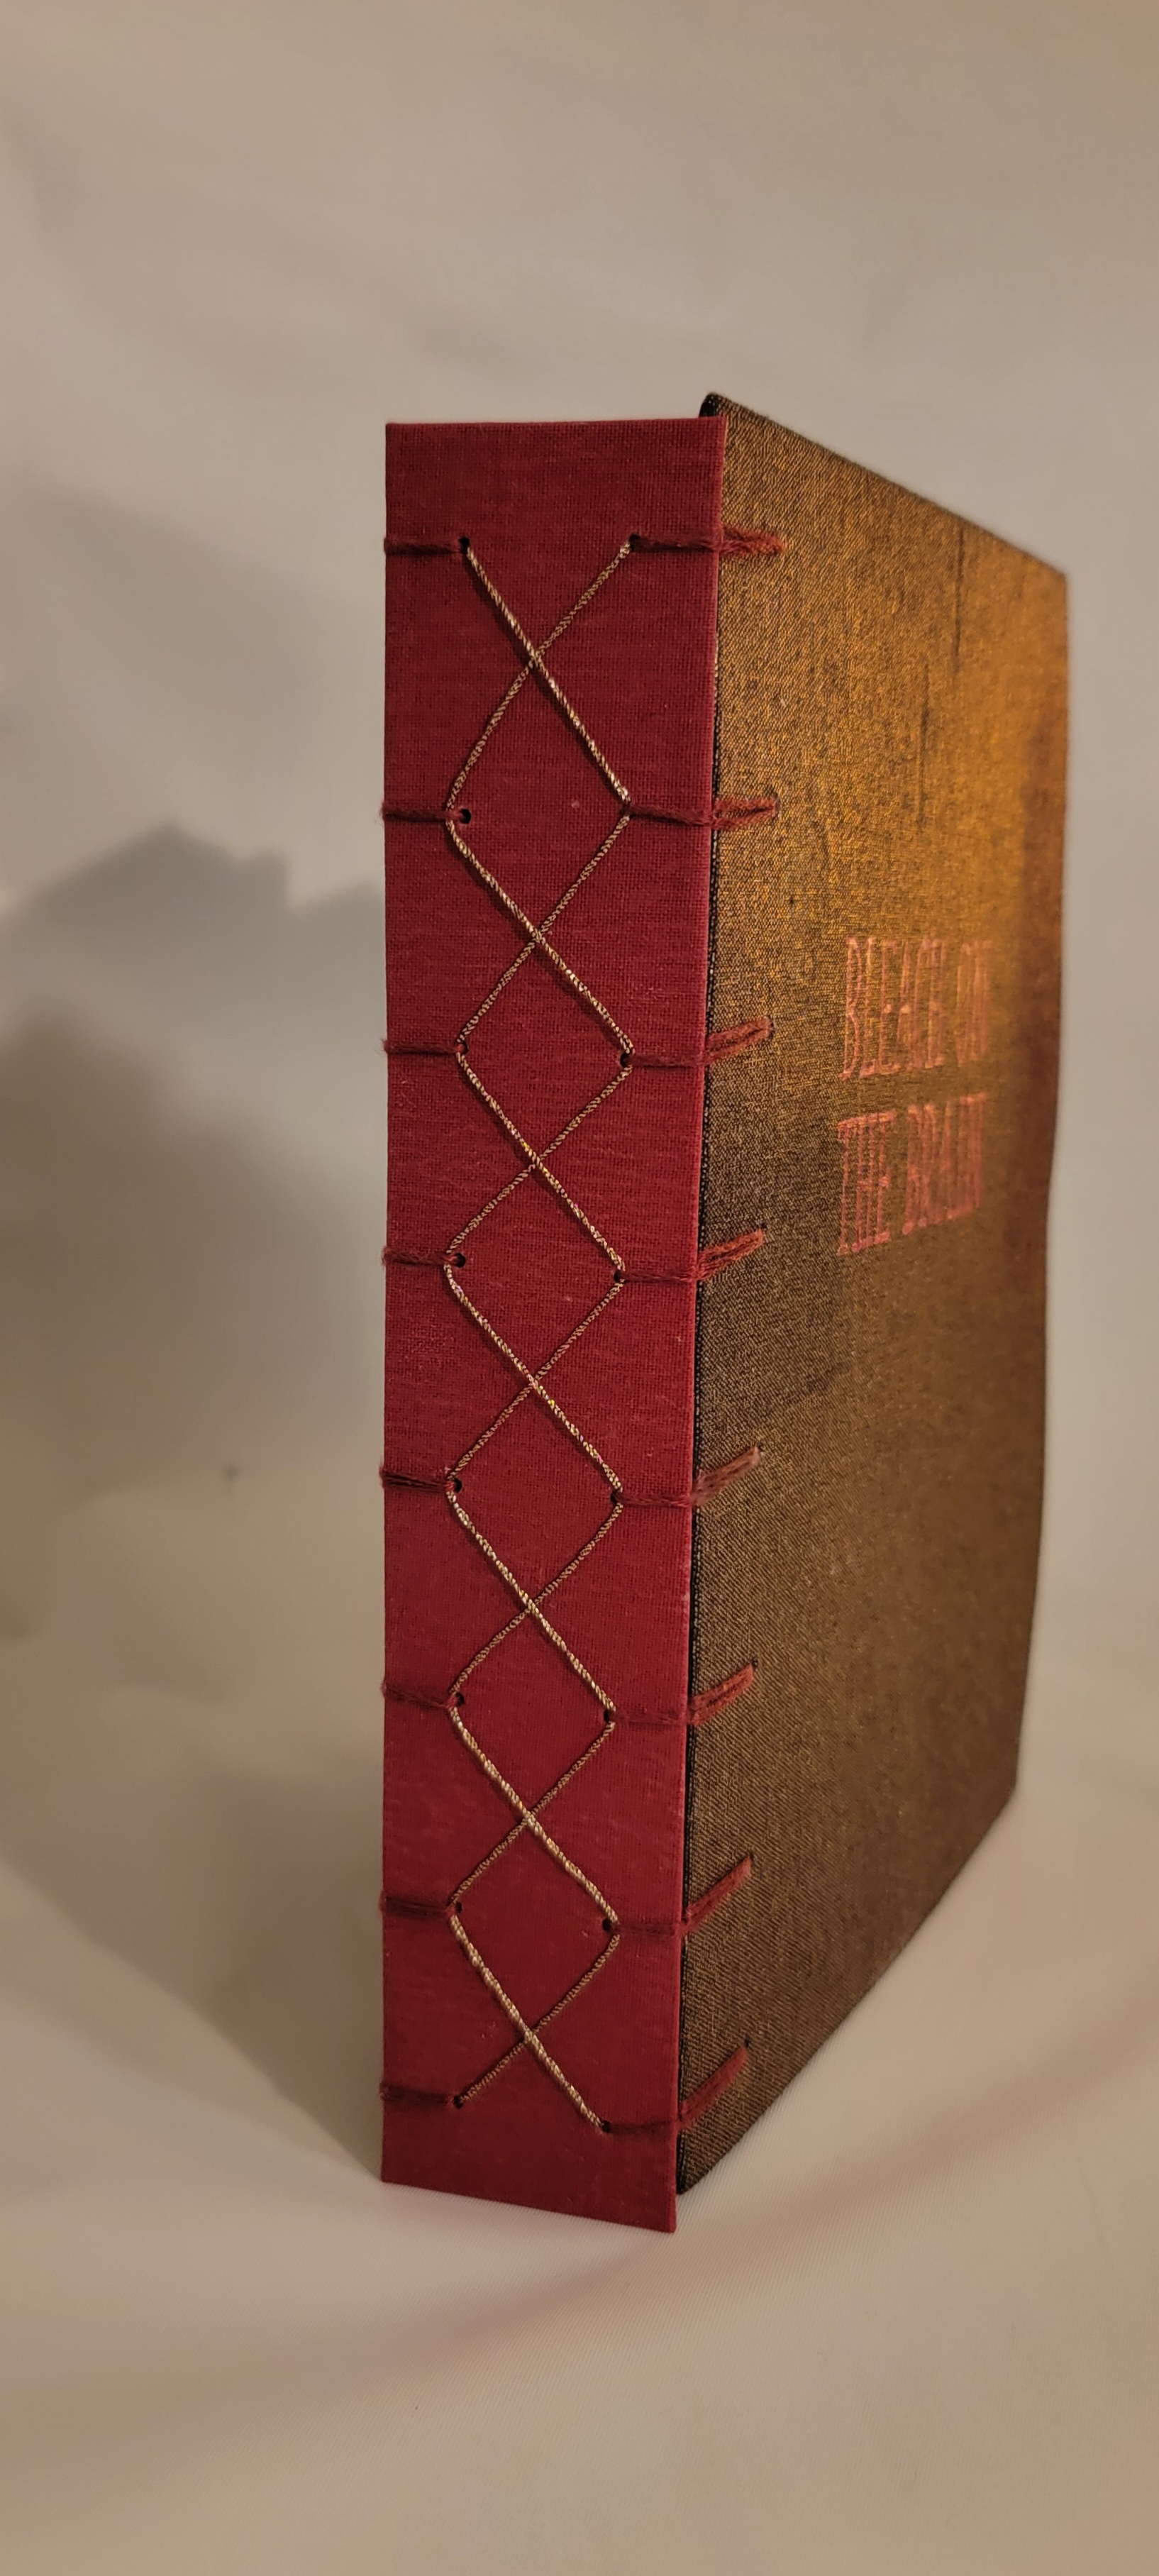 book with red spine and gold corset lacing